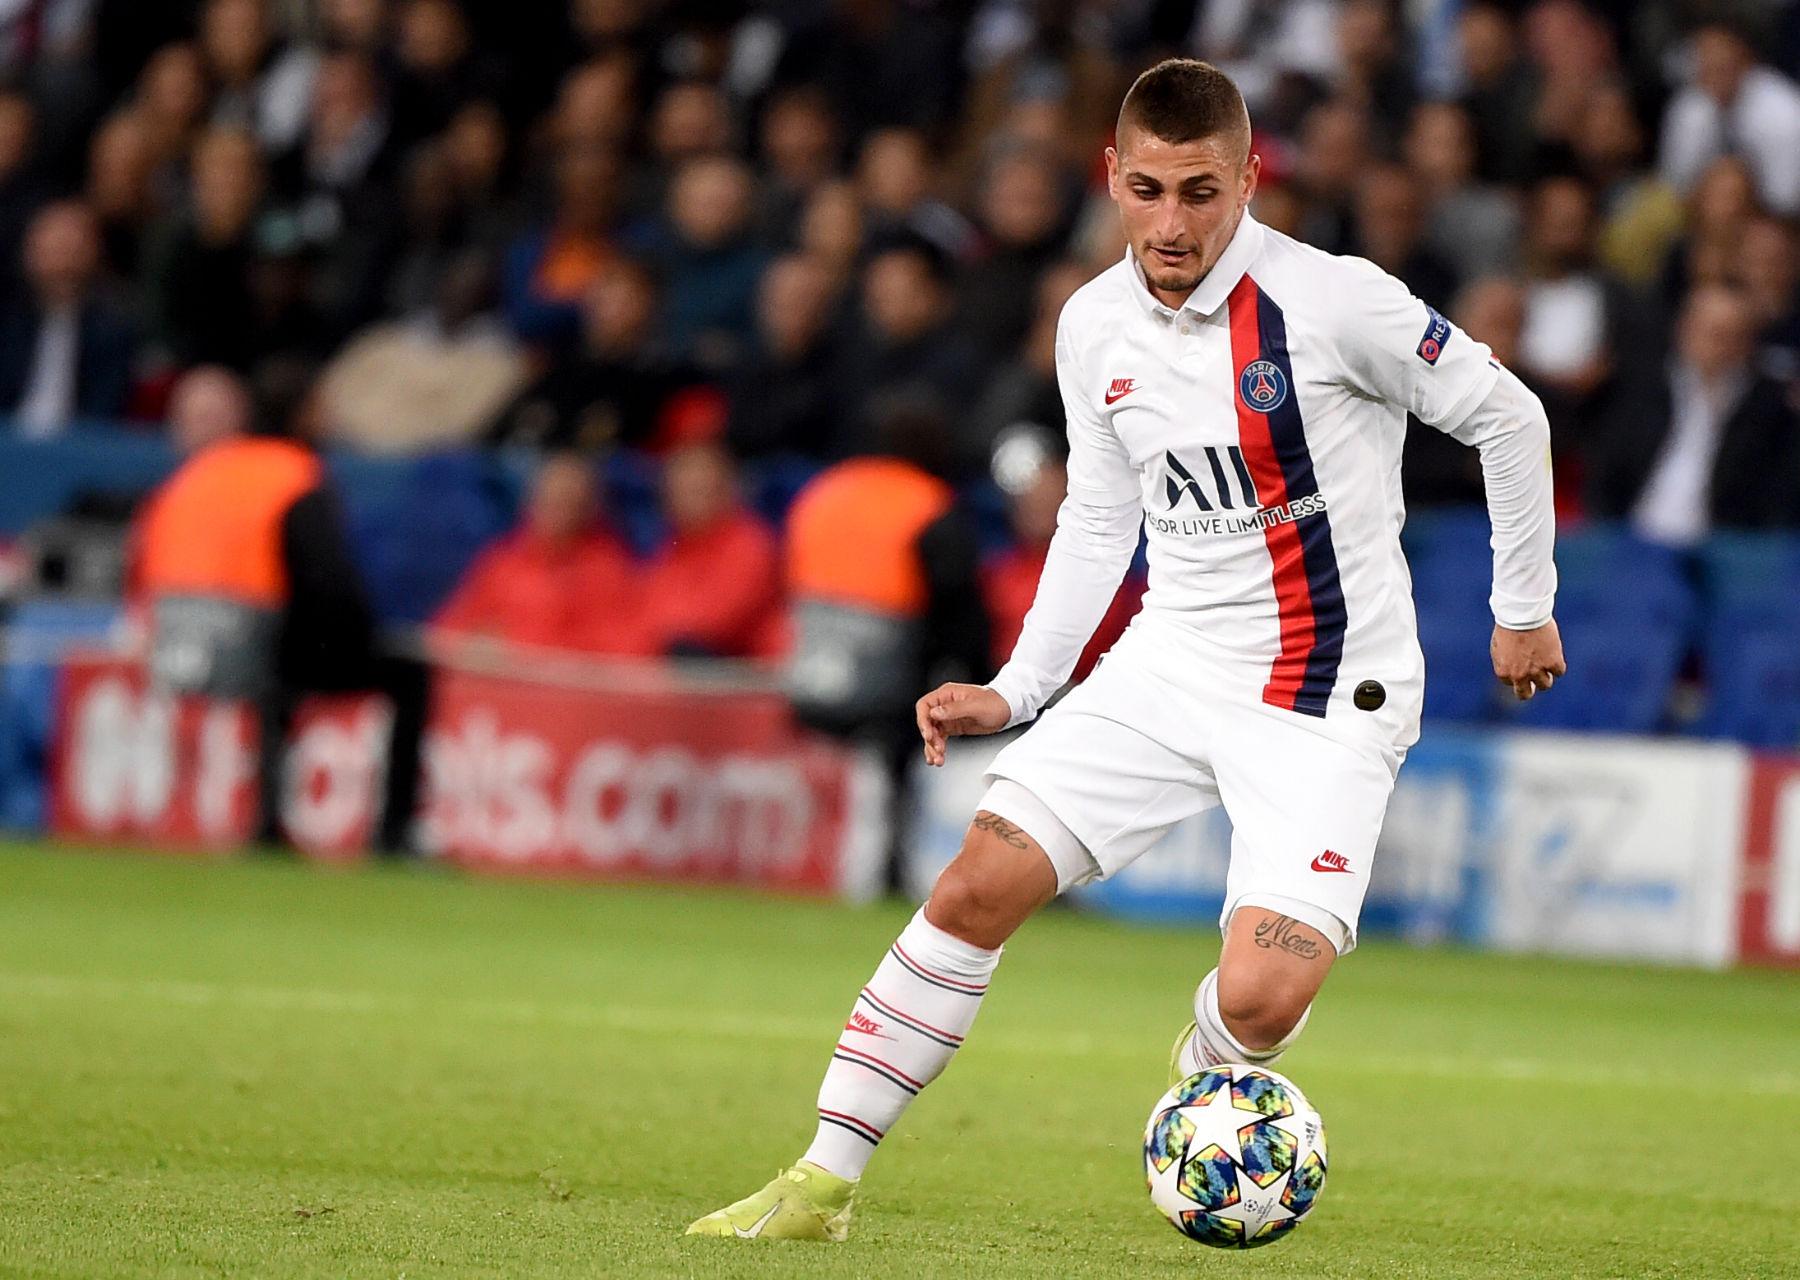 'They're a Bit of a Mad Team, Anything Can Happen With Them' - Marco Verratti on Borussia ...